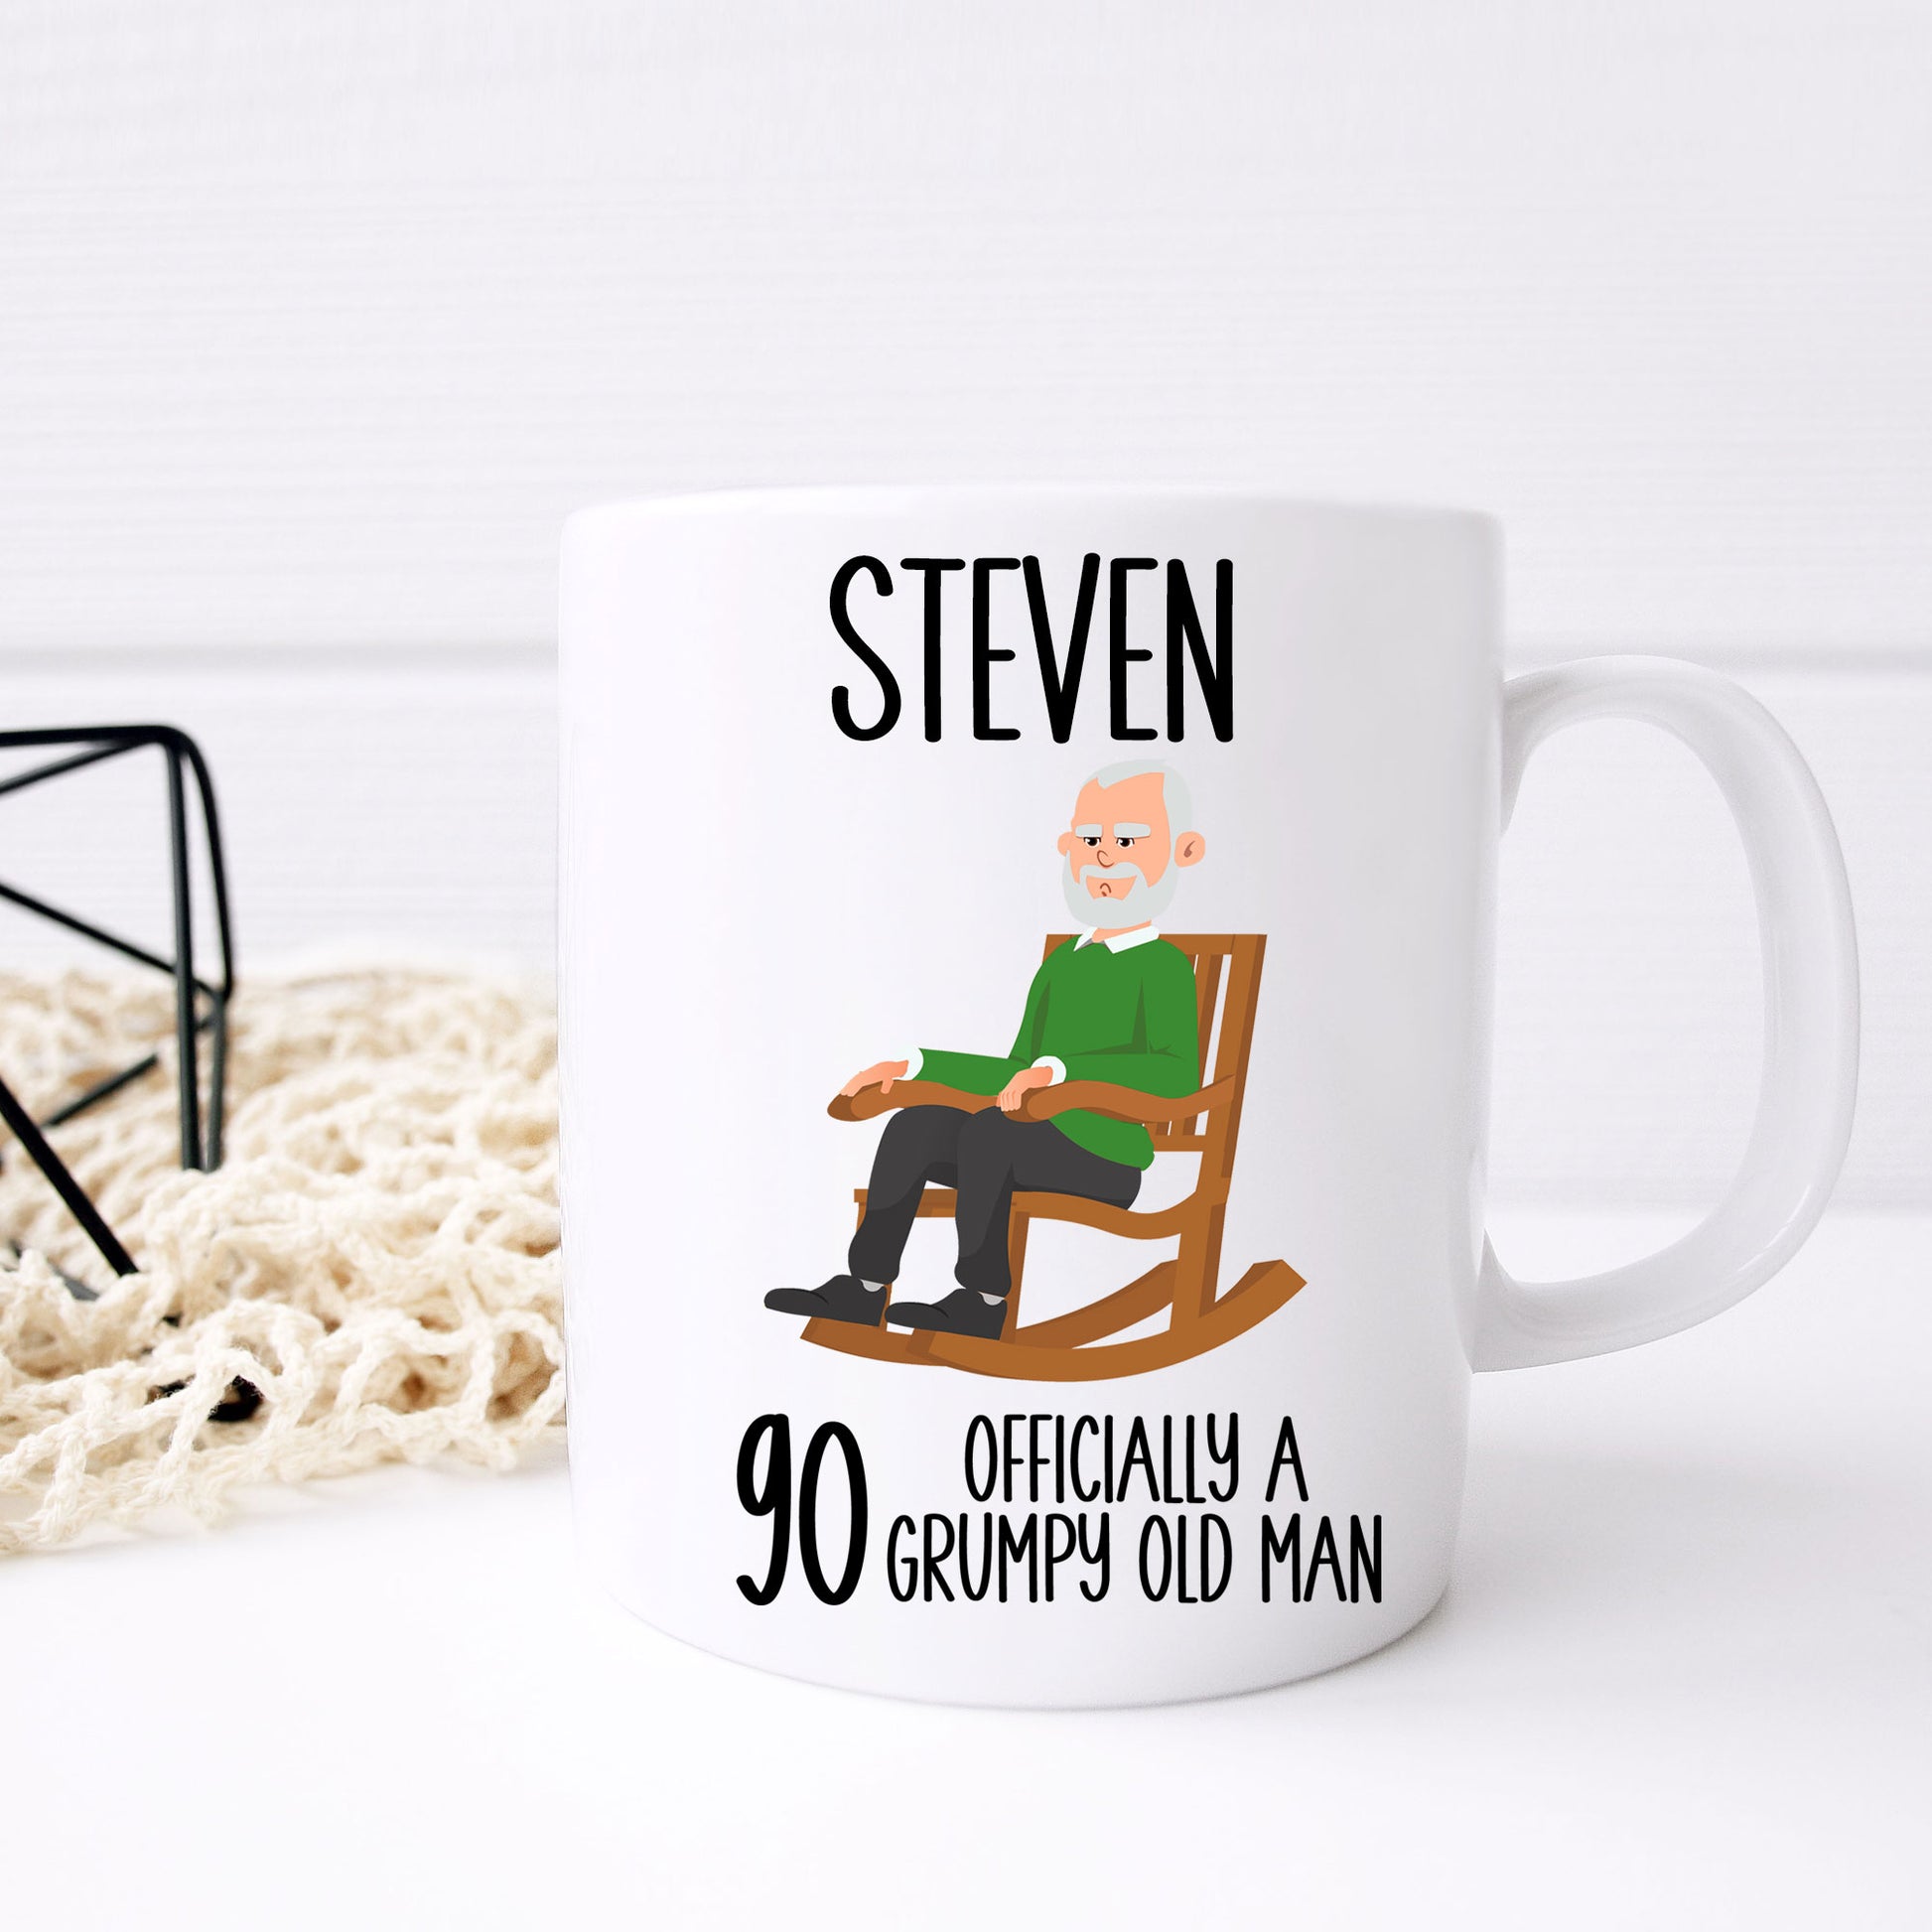 90th Officially A Grumpy Old Man Mug and/or Coaster Gift  - Always Looking Good -   